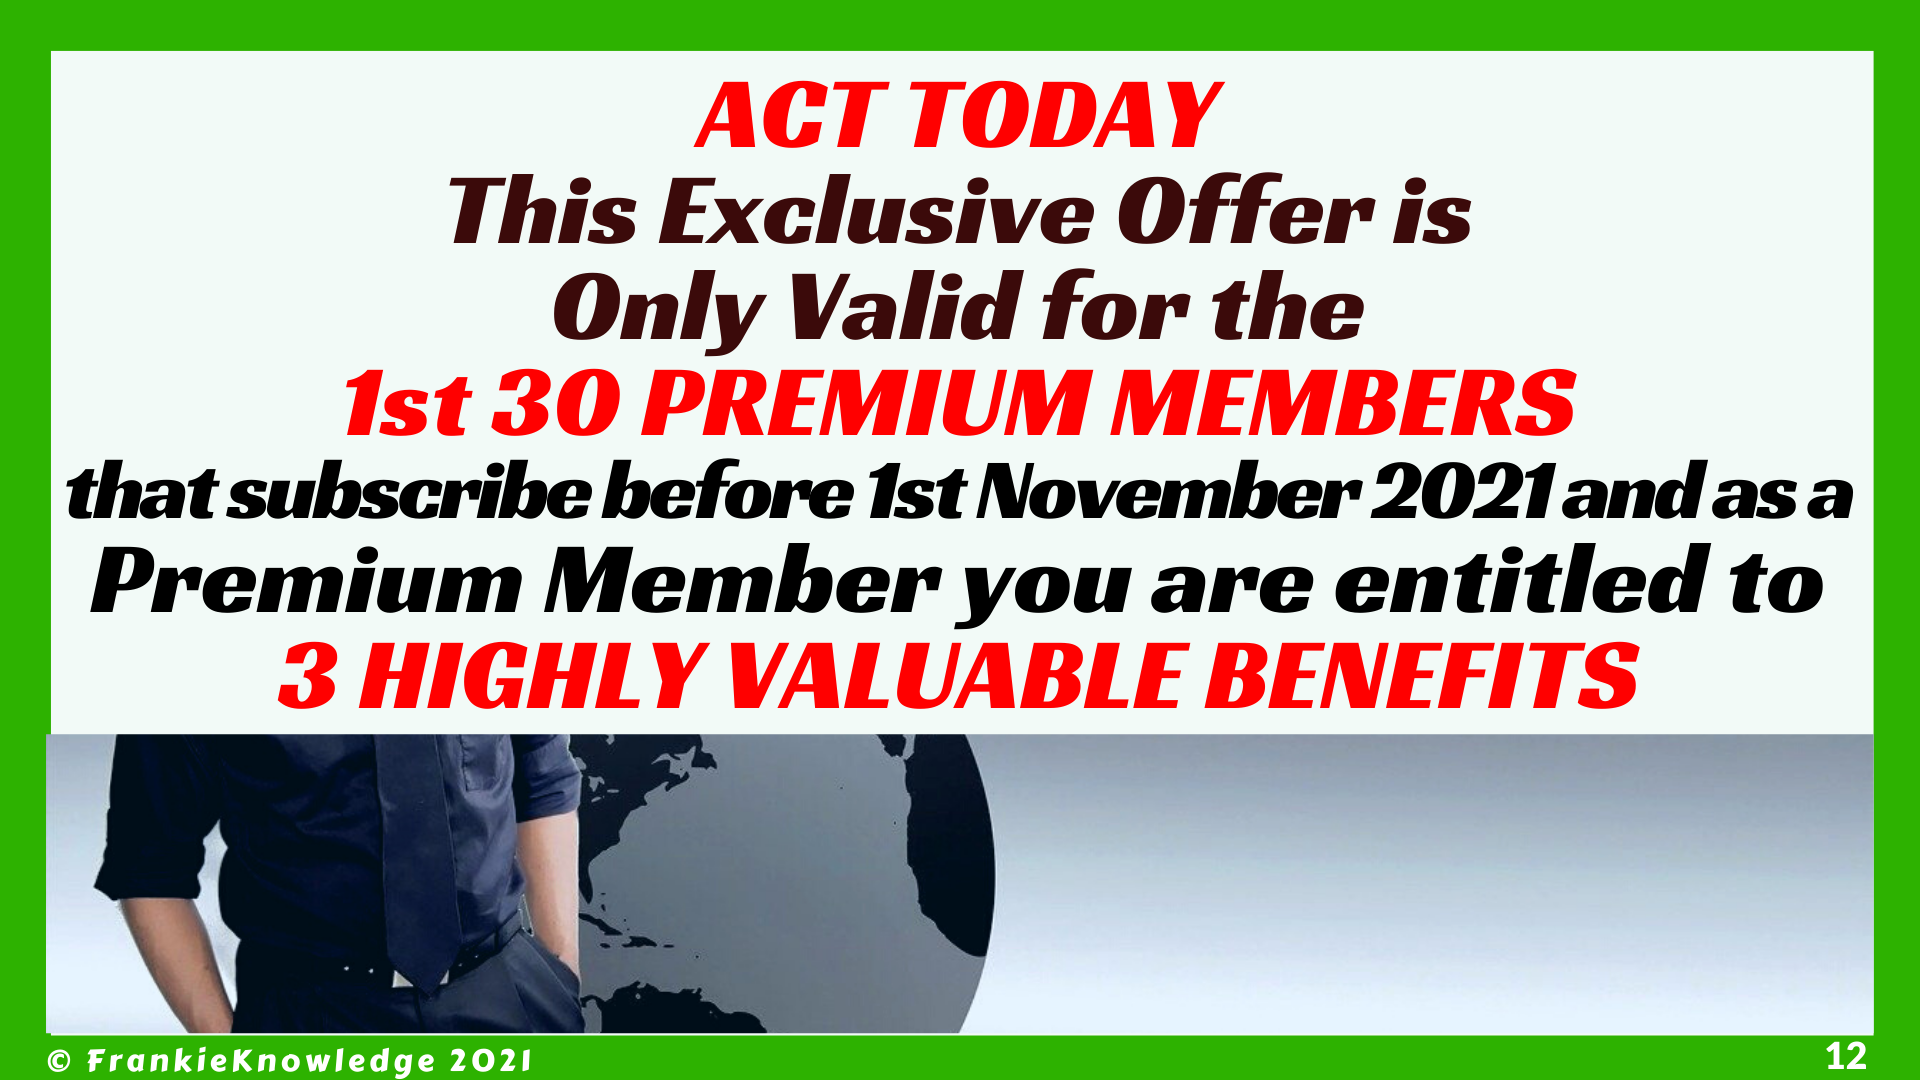 ACT Today to subscribe FrankieKnowledge Latest Premium Video Channel